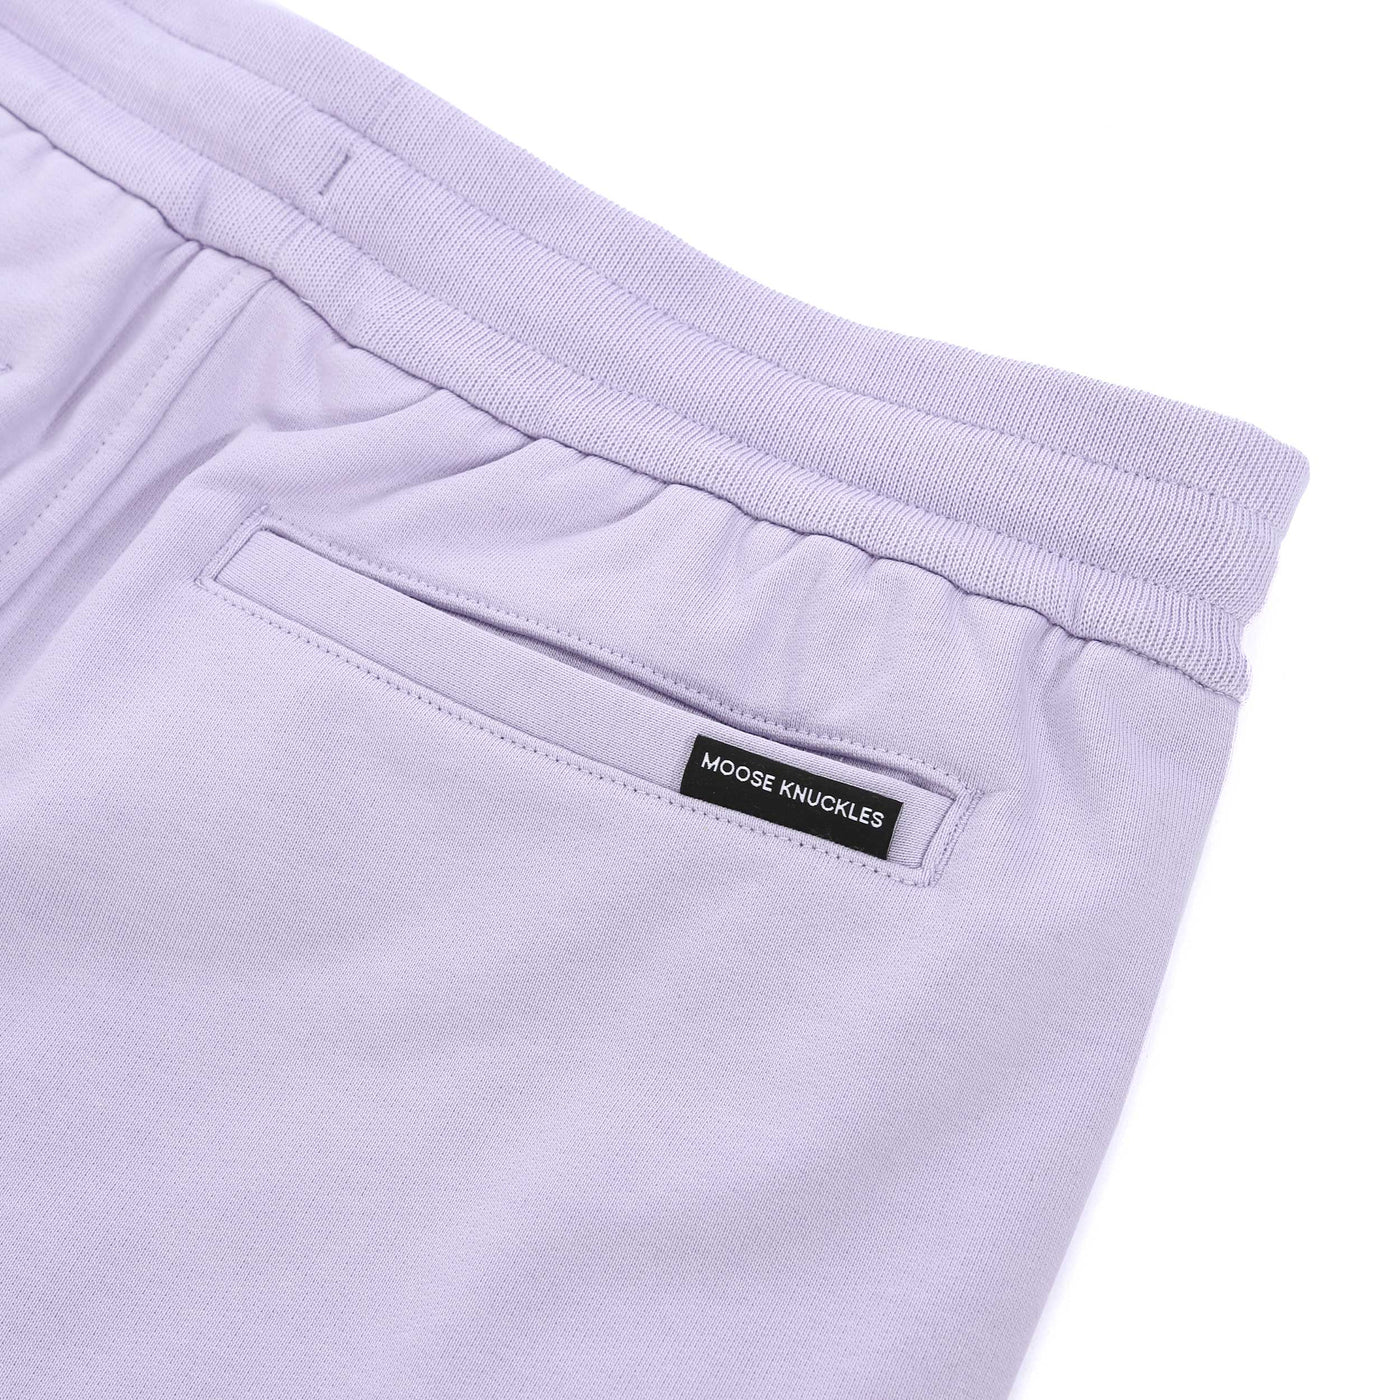 Moose Knuckles Clyde Shorts Sweat Short in Orchid Petal Logo Tab